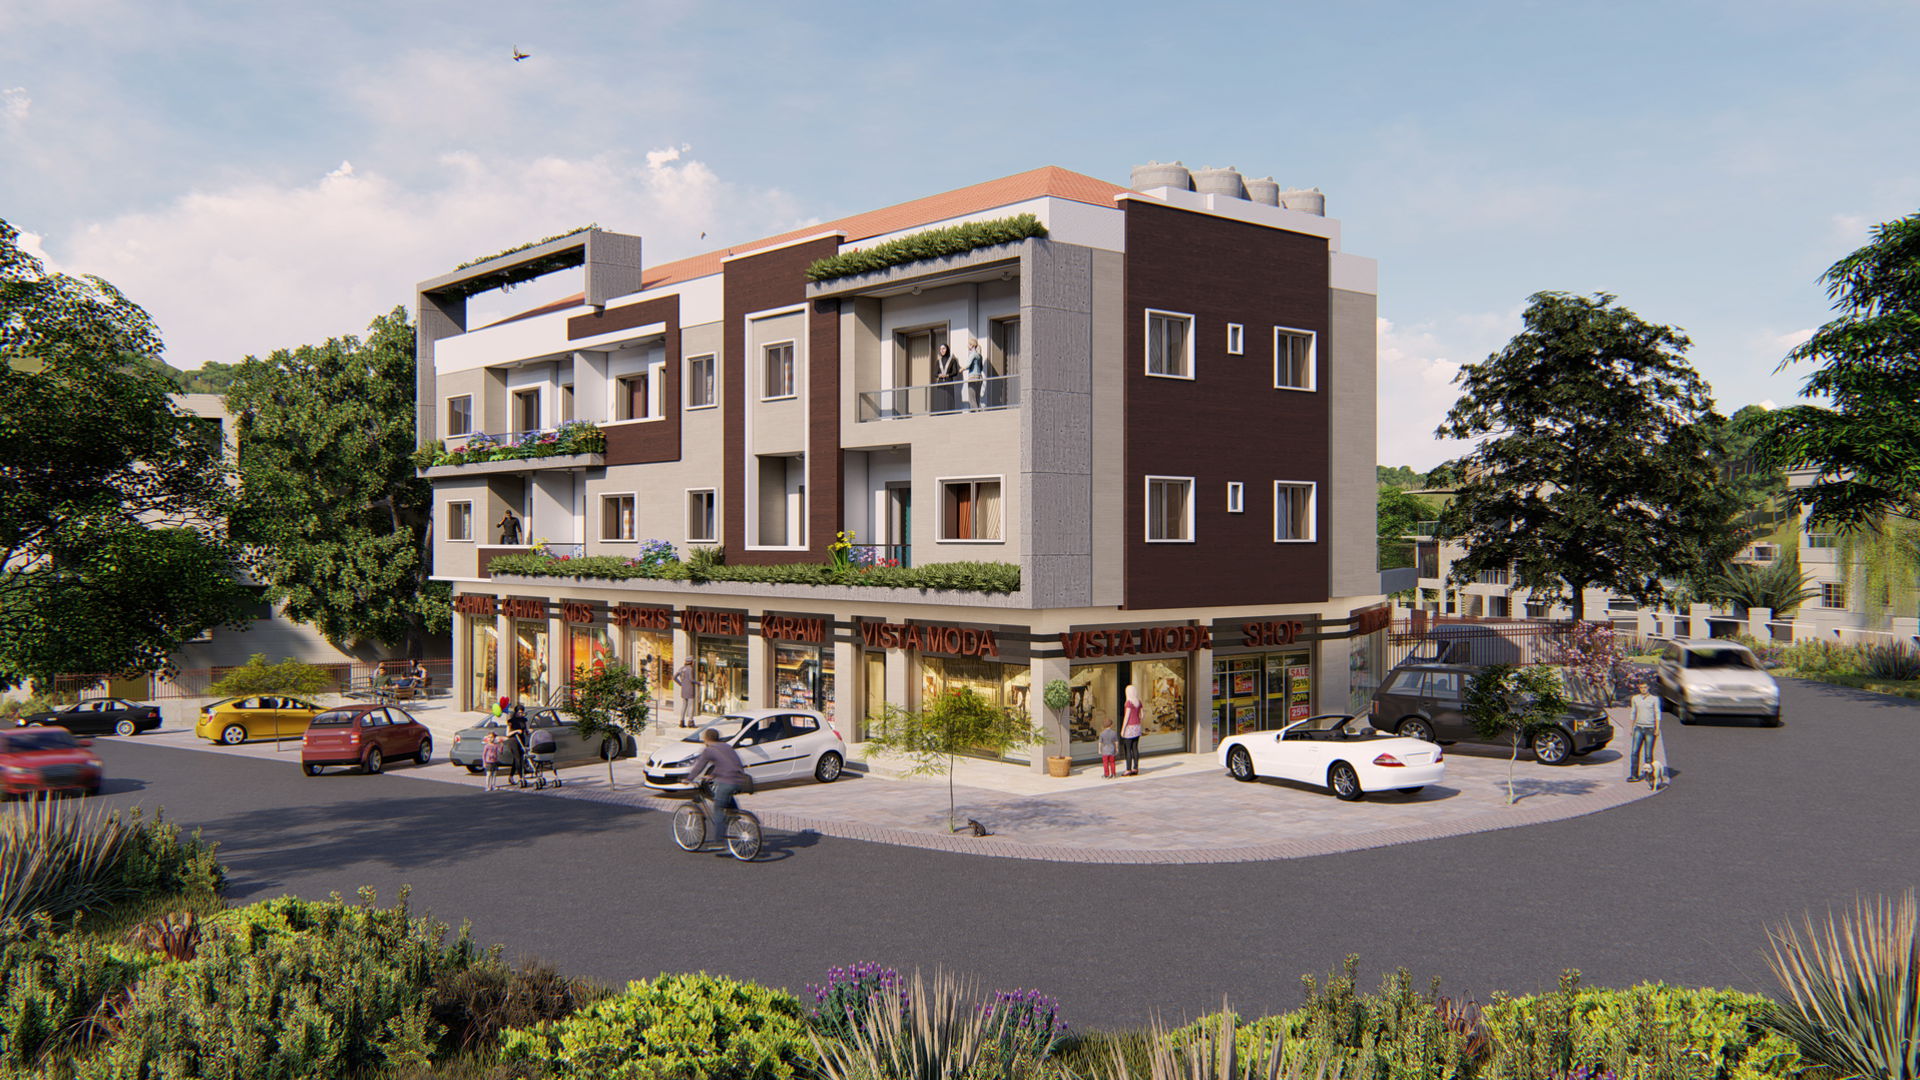 Architecture & engineering design & rendering for a Residential appartment building in chaqraa, south lebanon with commercial stores.